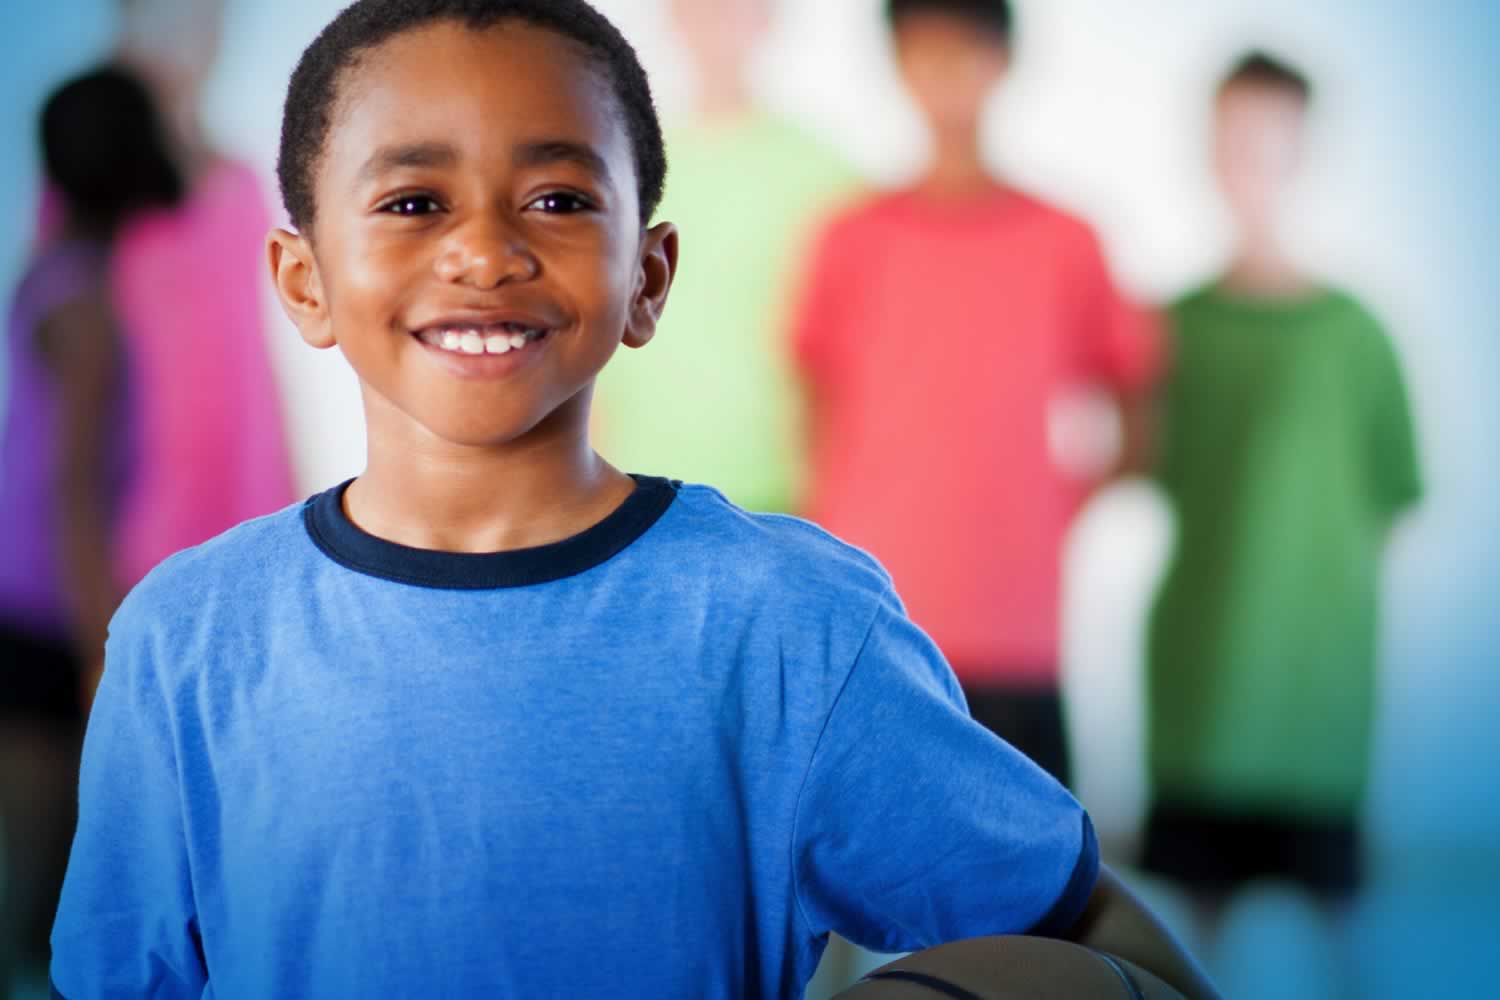 Young boy in a blue shirt smiles as (faded) children look on behind